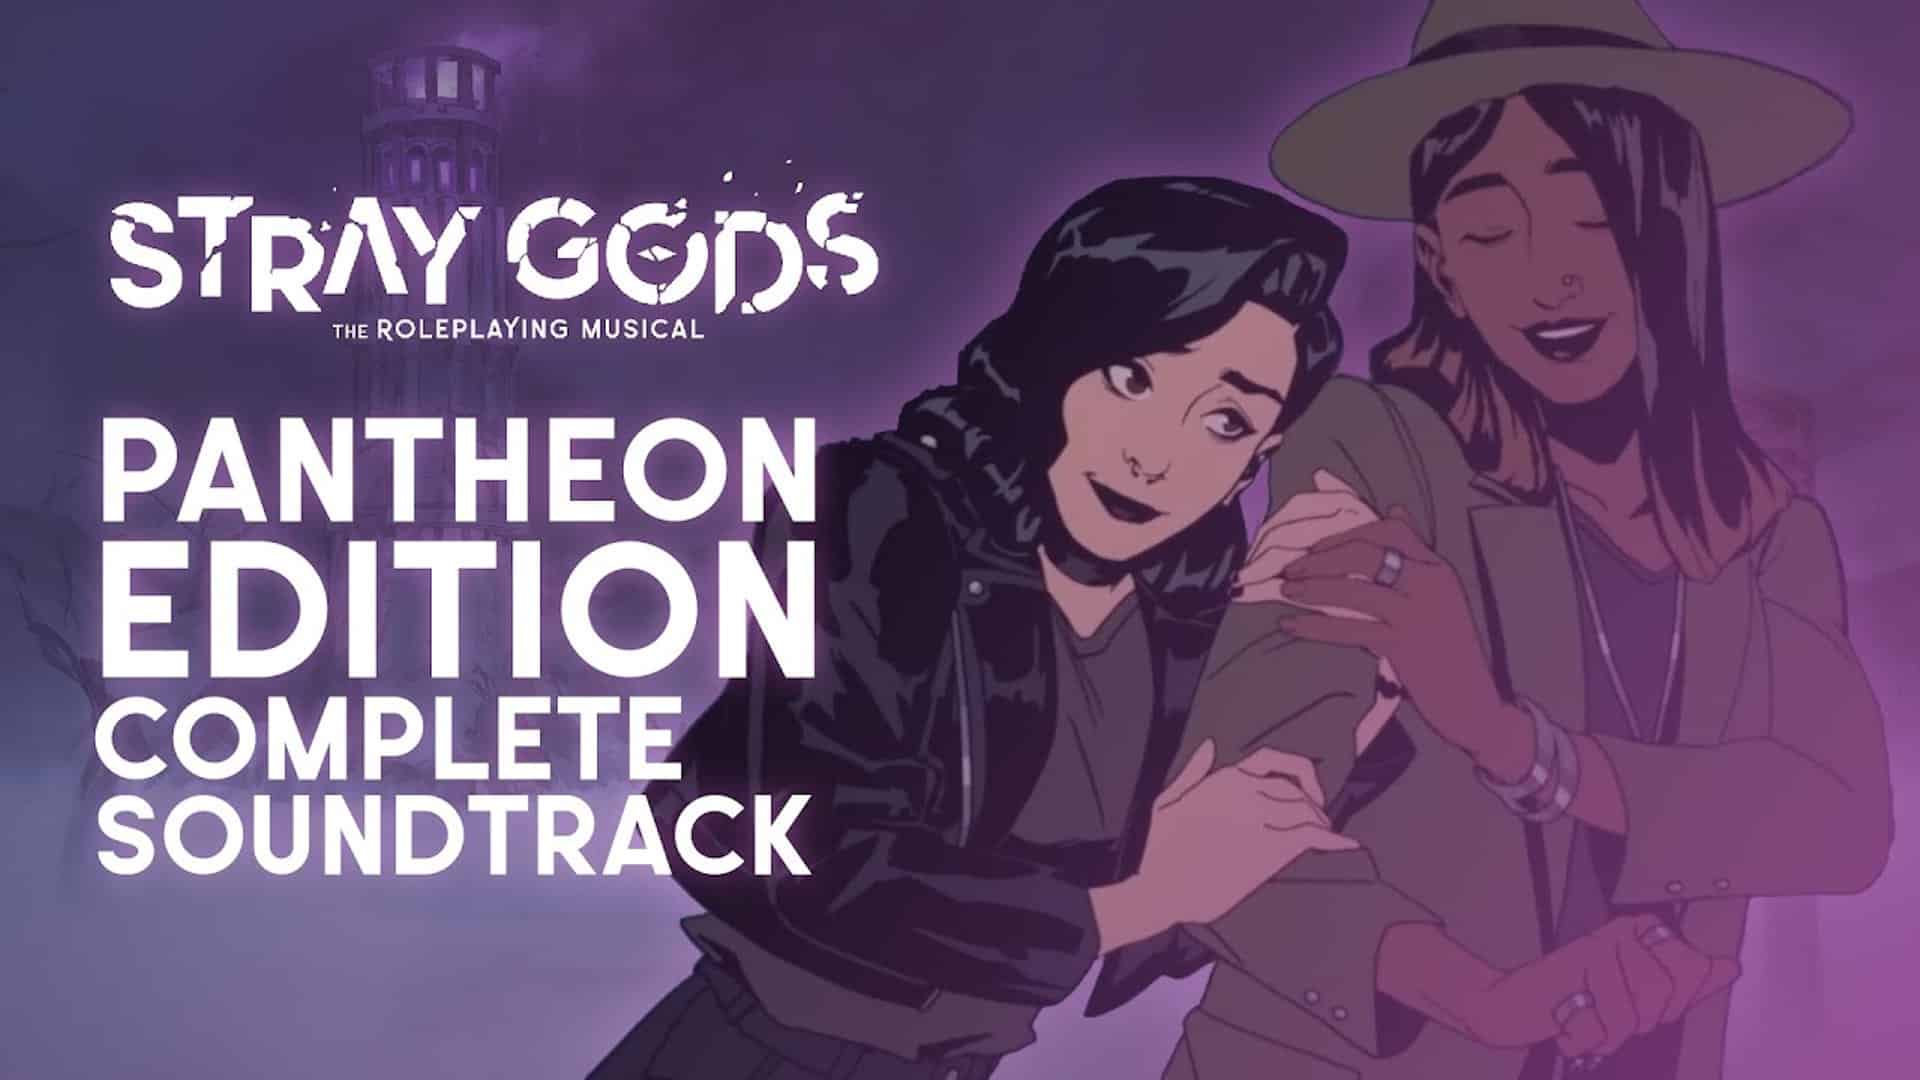 Stray Gods: The Roleplaying Musical Soundtrack